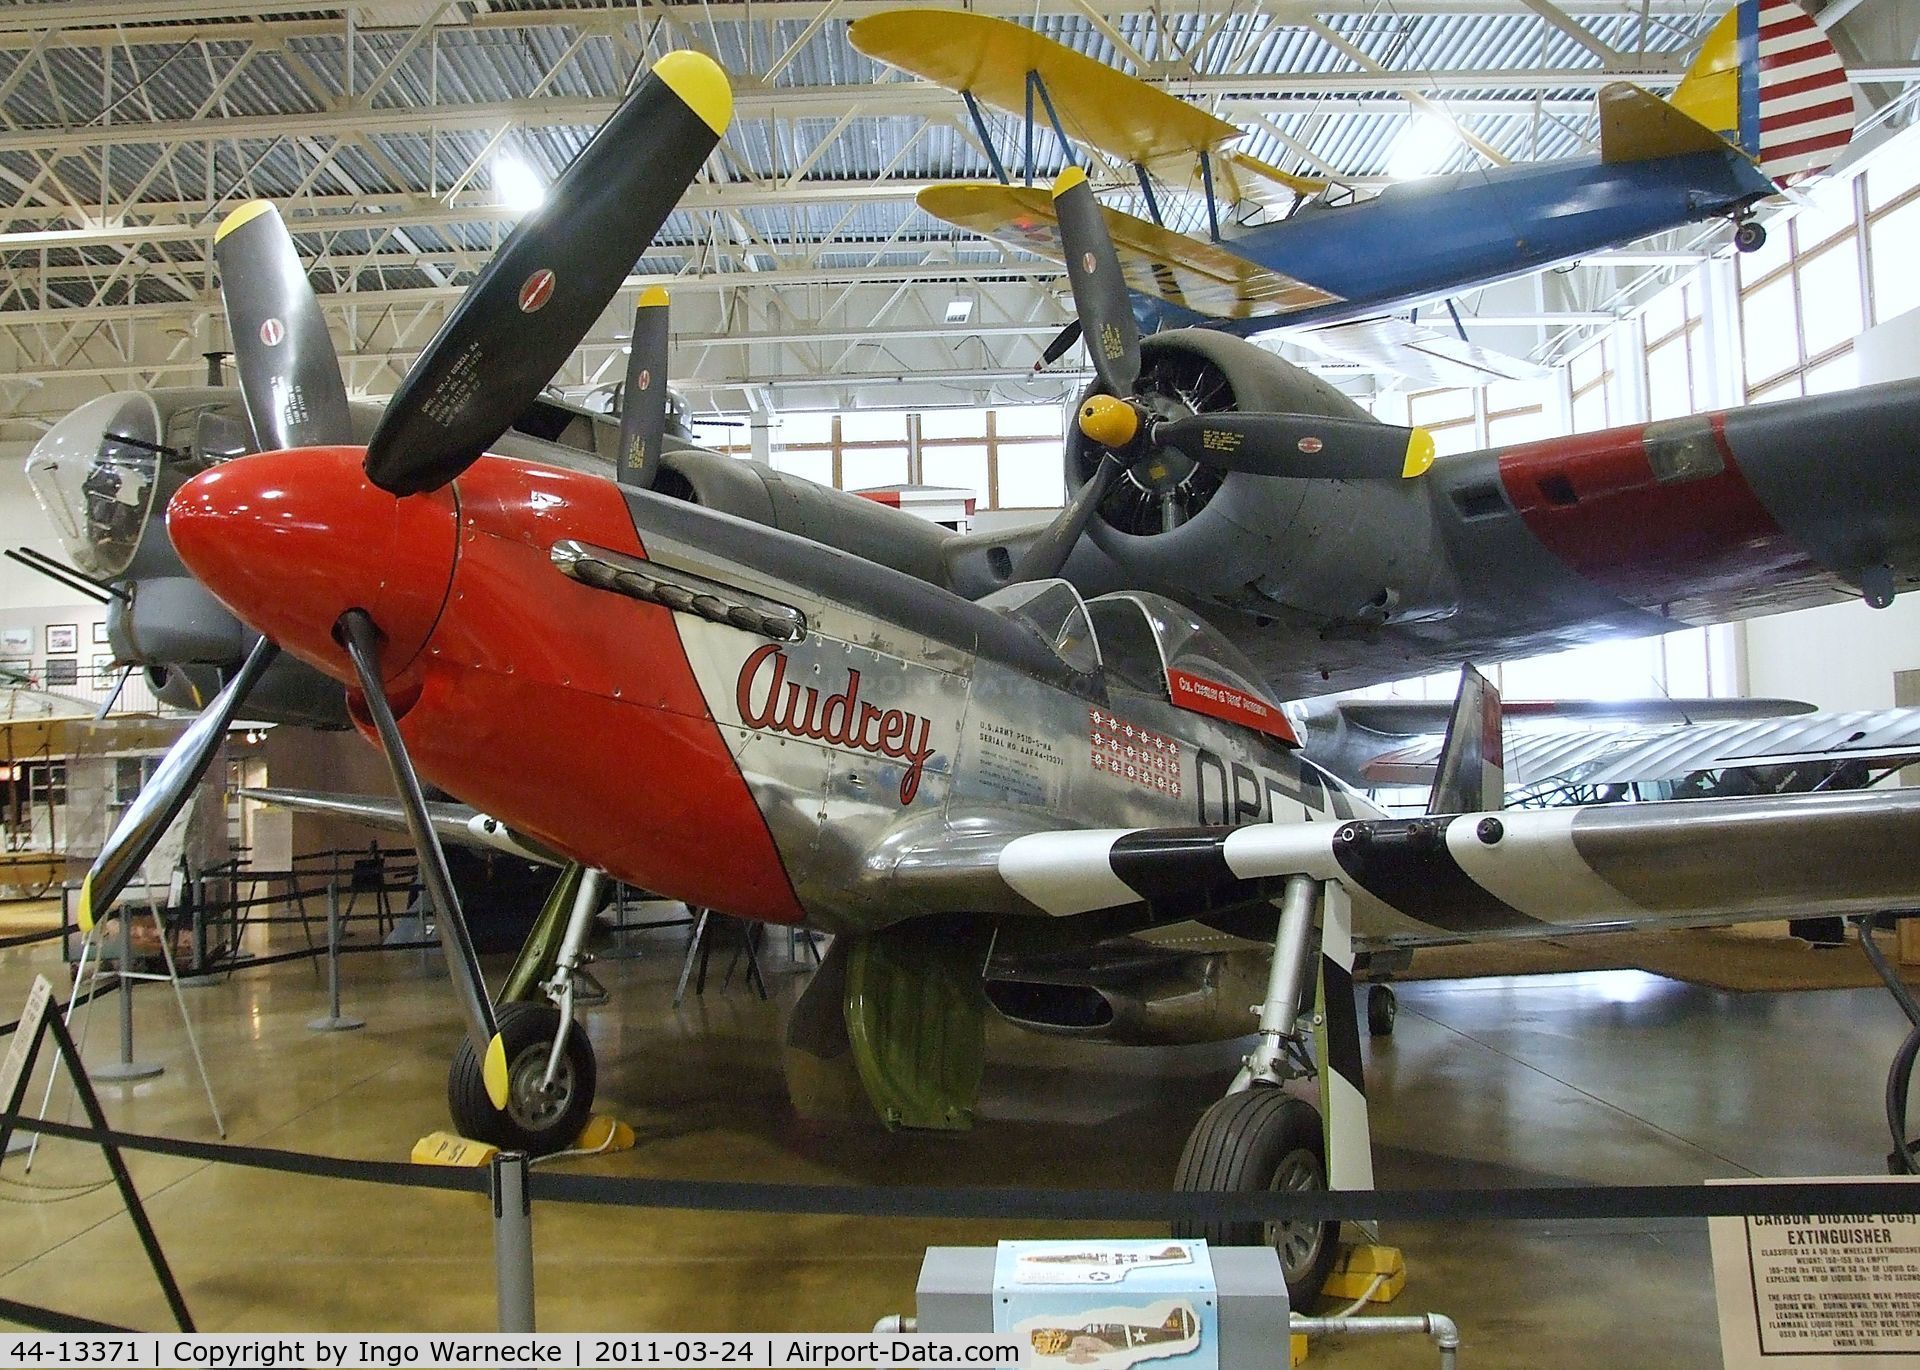 44-13371, North American P-51D Mustang C/N 118-27004, North American P-51D Mustang at the Hill Aerospace Museum, Roy UT